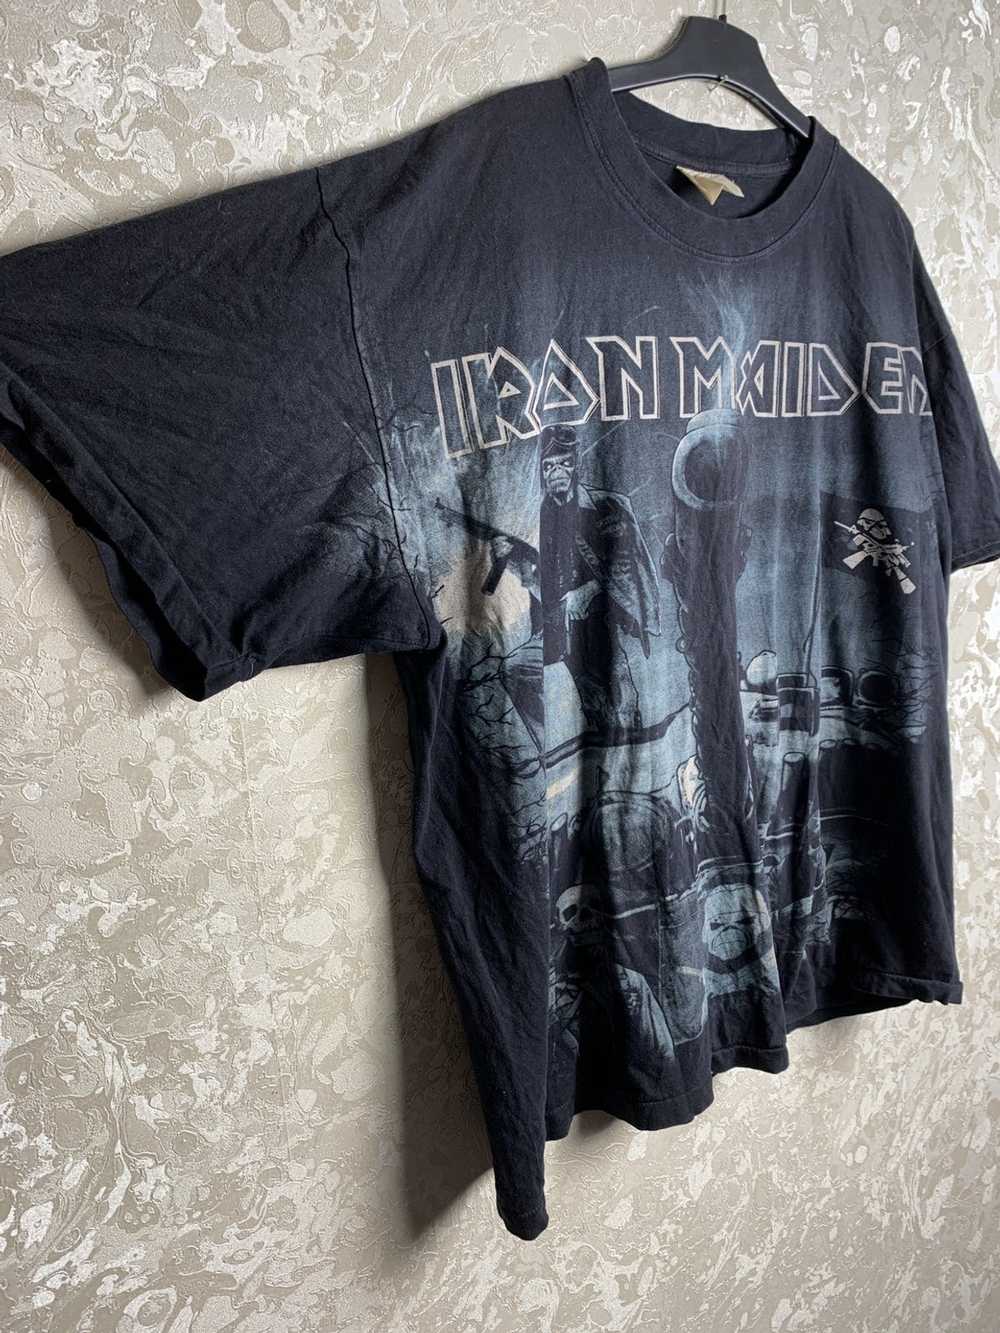 Band Tees × Iron Maiden × Vintage Vintage over pr… - image 2